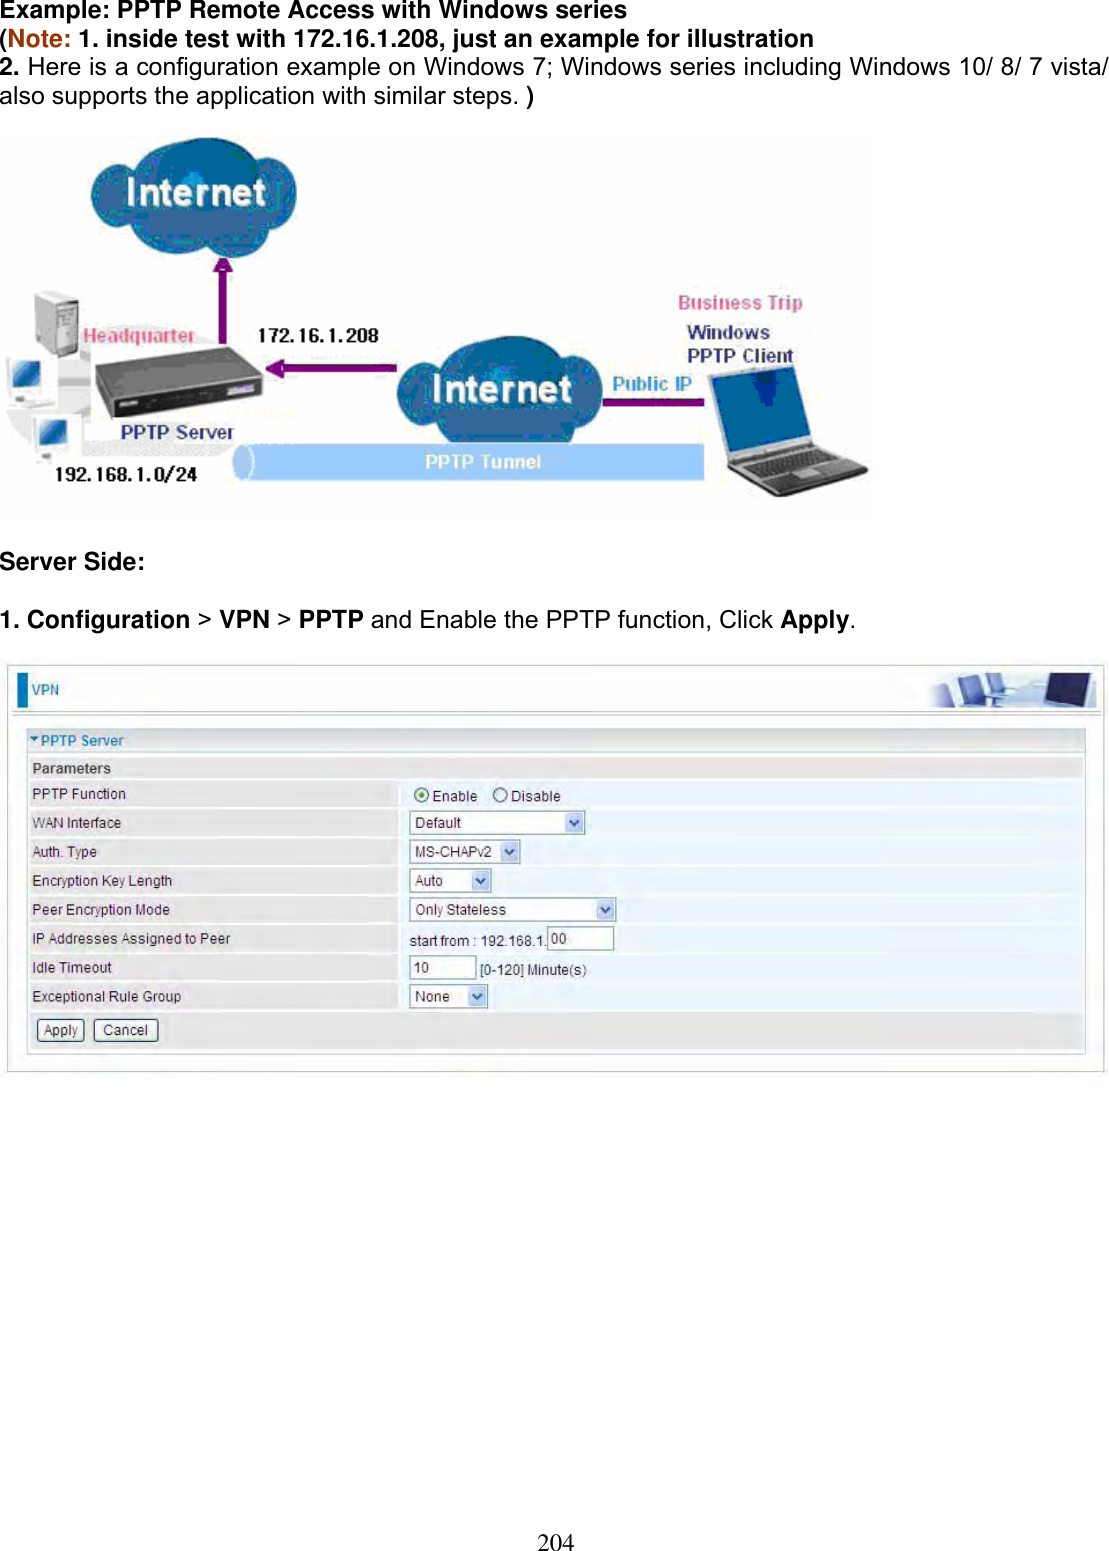 204Example: PPTP Remote Access with Windows series  (Note: 1. inside test with 172.16.1.208, just an example for illustration2. Here is a configuration example on Windows 7; Windows series including Windows 10/ 8/ 7 vista/ also supports the application with similar steps. ) Server Side: 1. Configuration &gt;VPN &gt;PPTP and Enable the PPTP function, Click Apply.